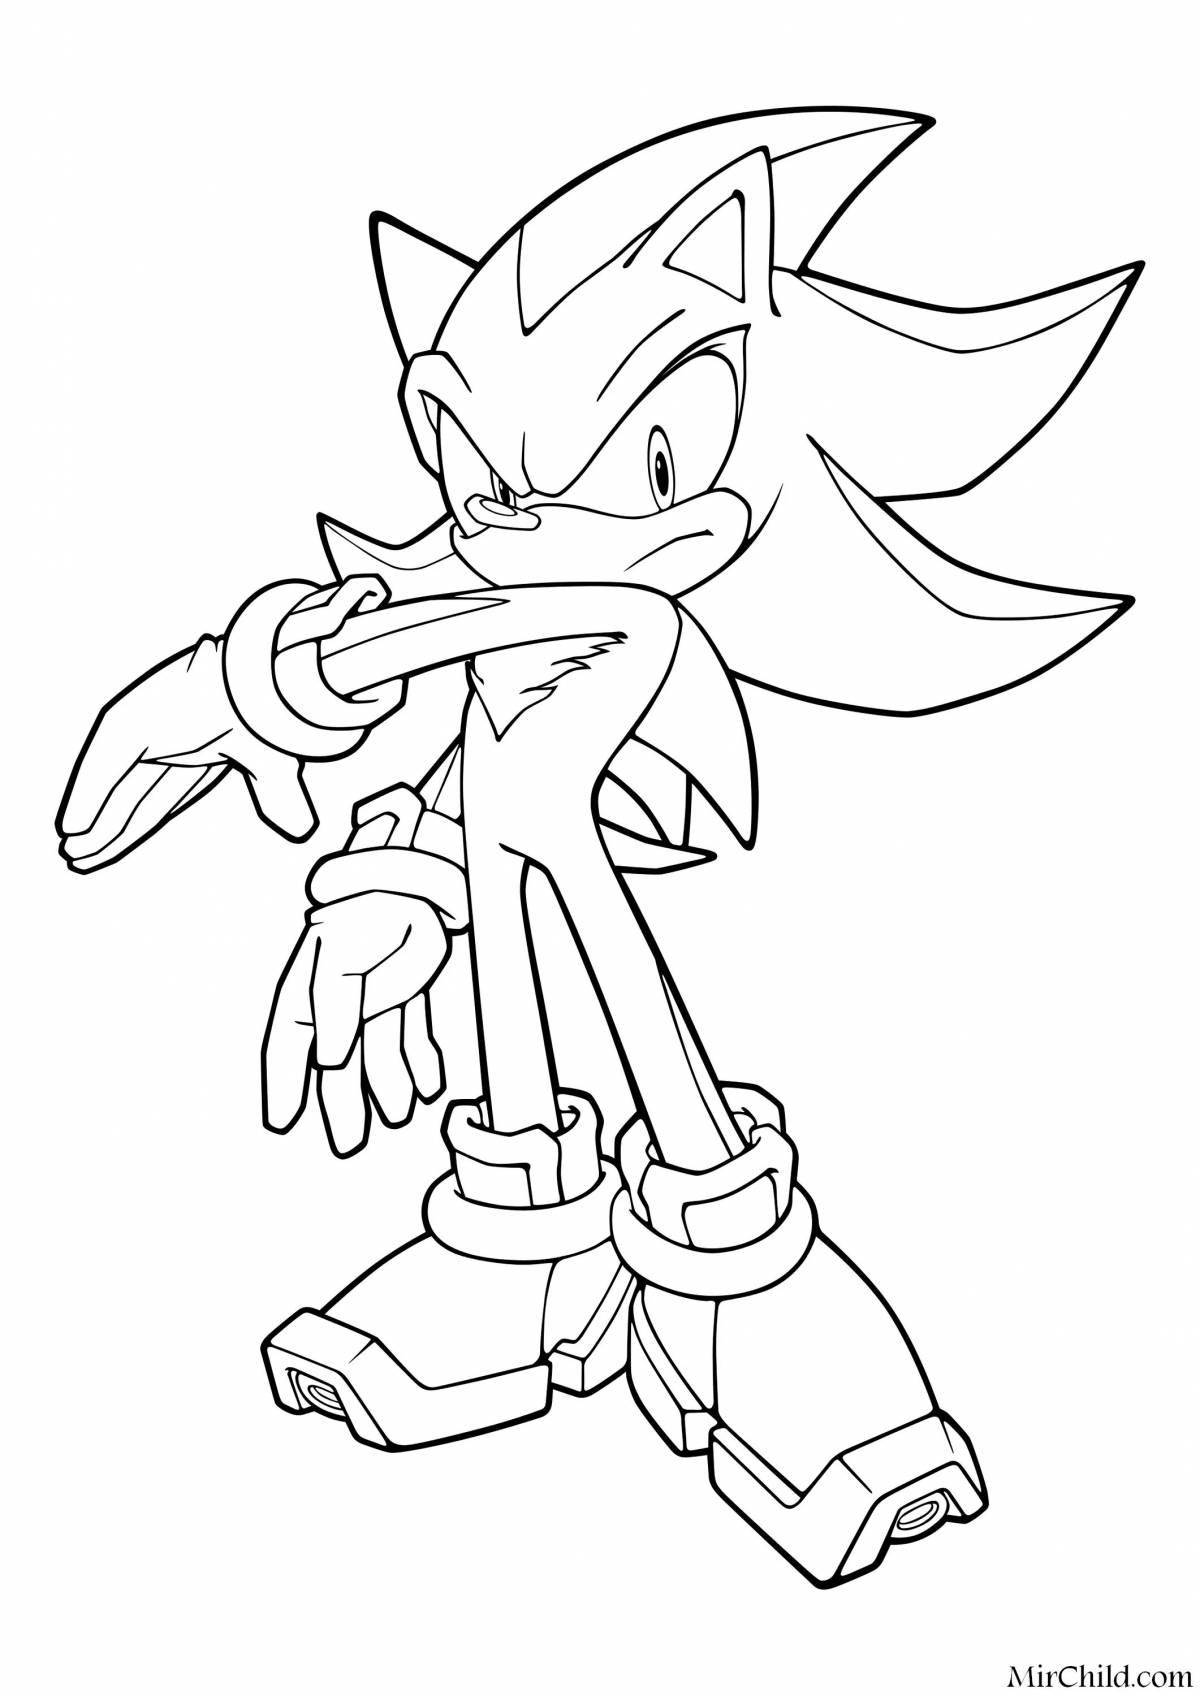 Sonic shader style coloring